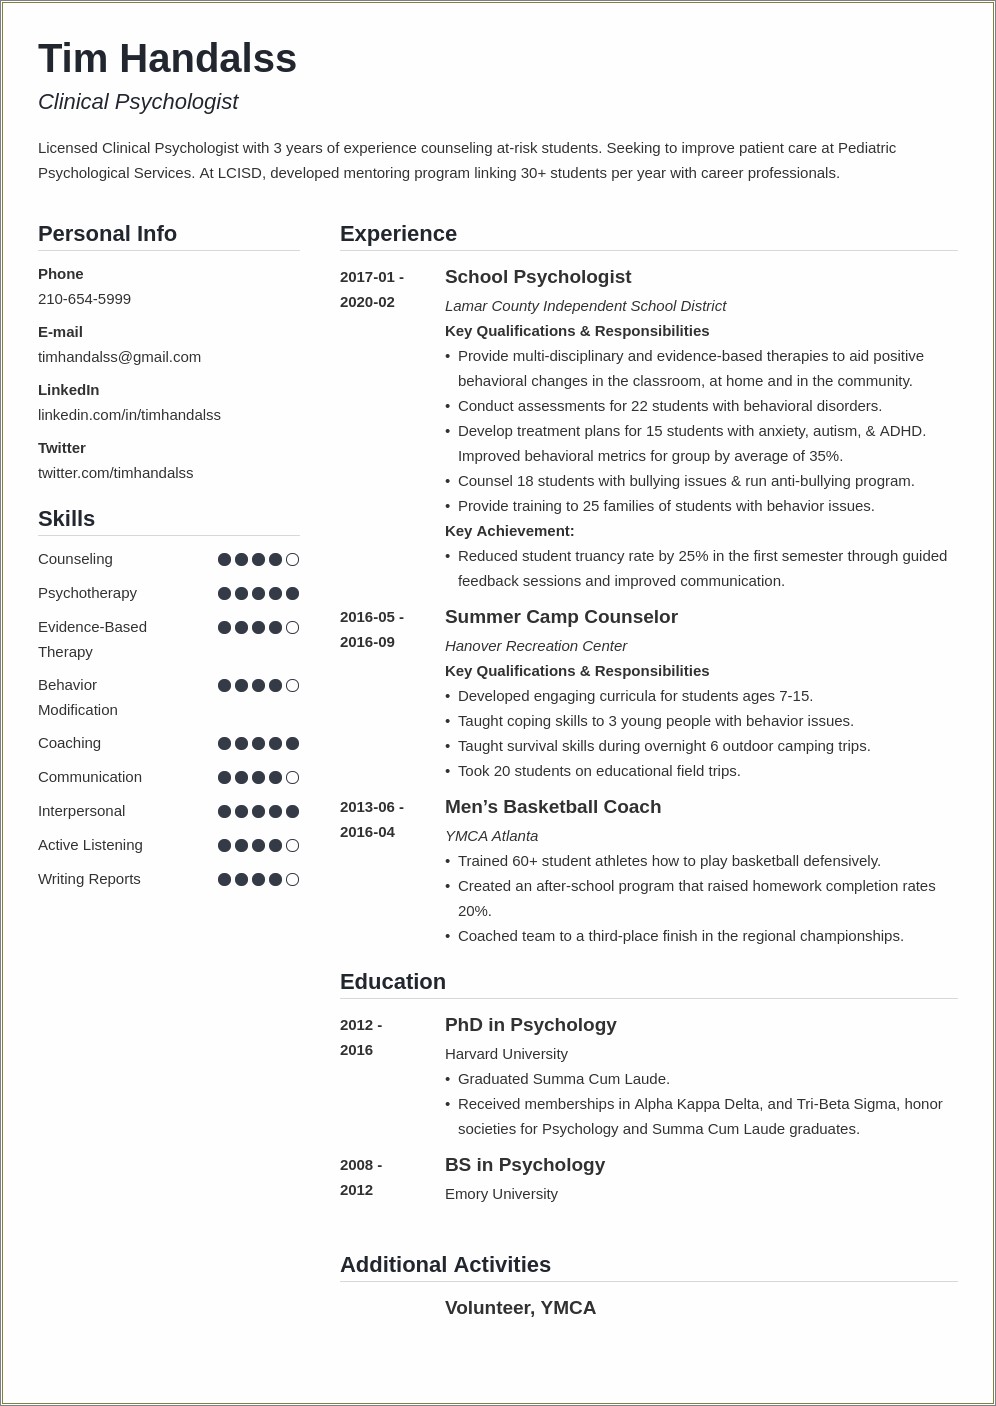 Resume Objective Examples For Recent Psychology College Graduates